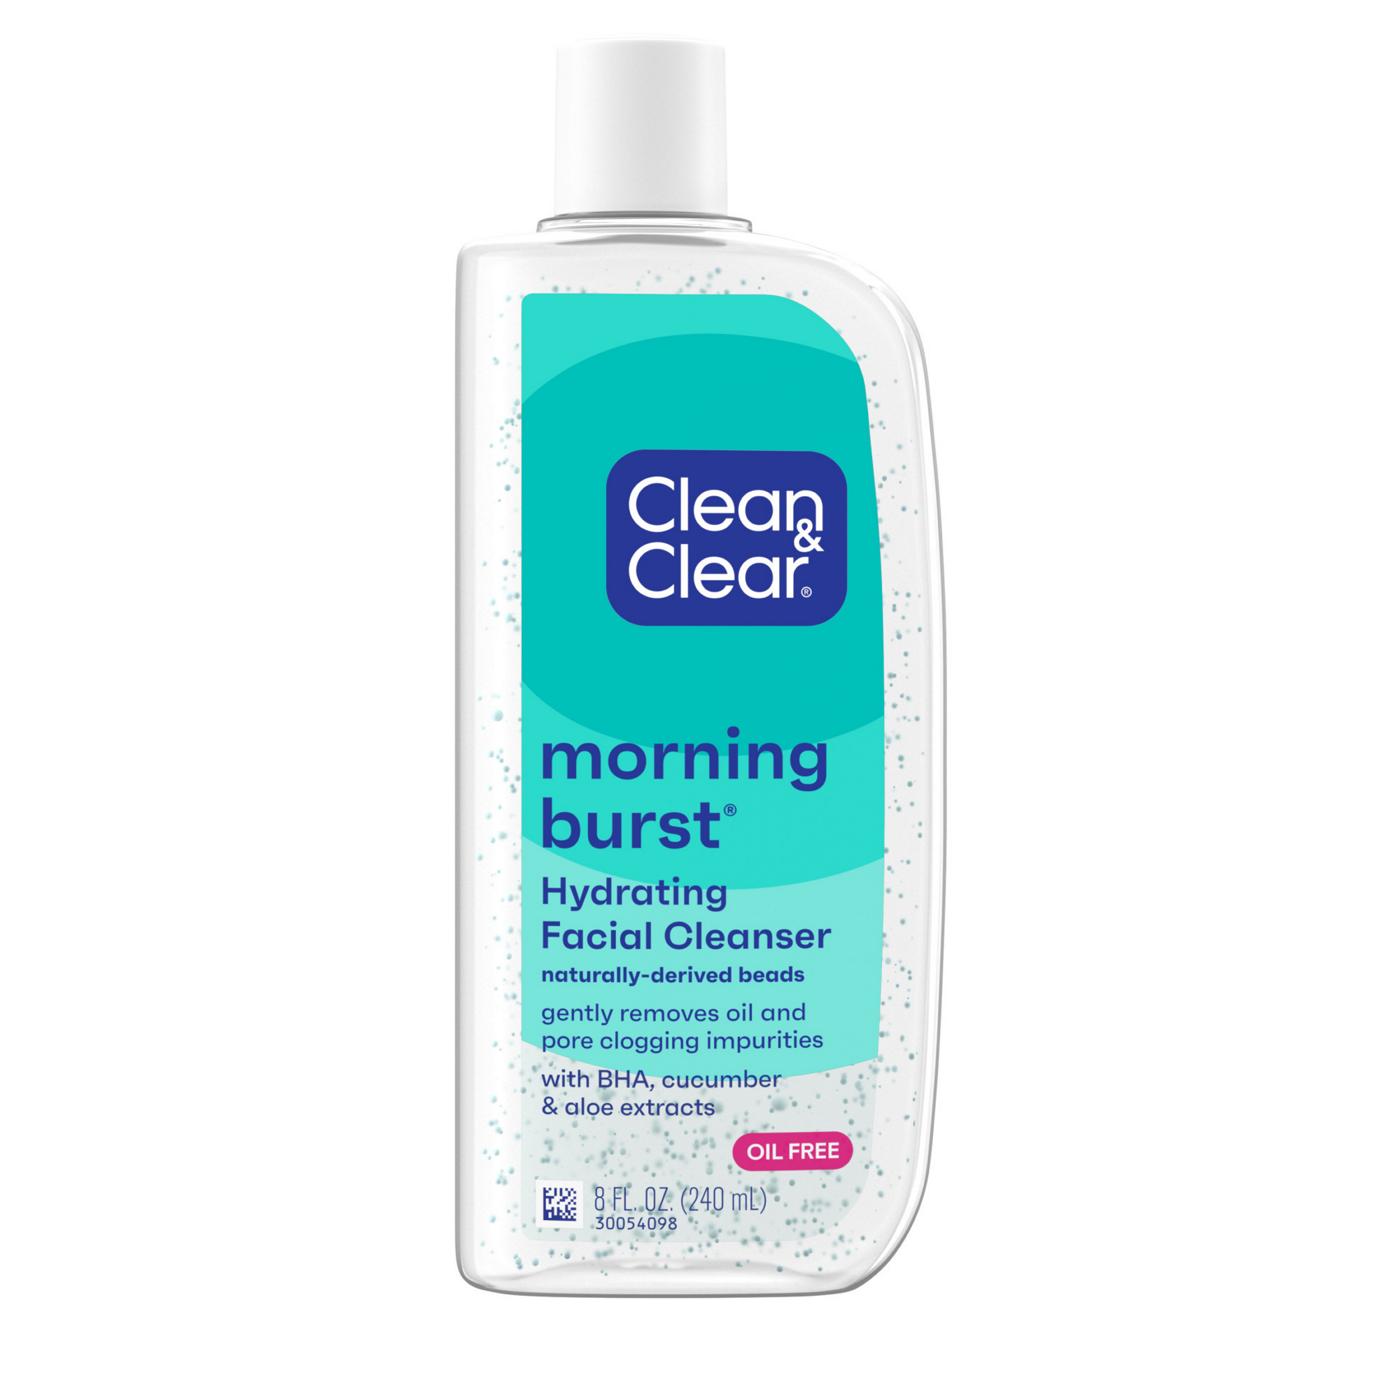 Clean & Clear Morning Burst Hydrating Facial Cleanser; image 1 of 8